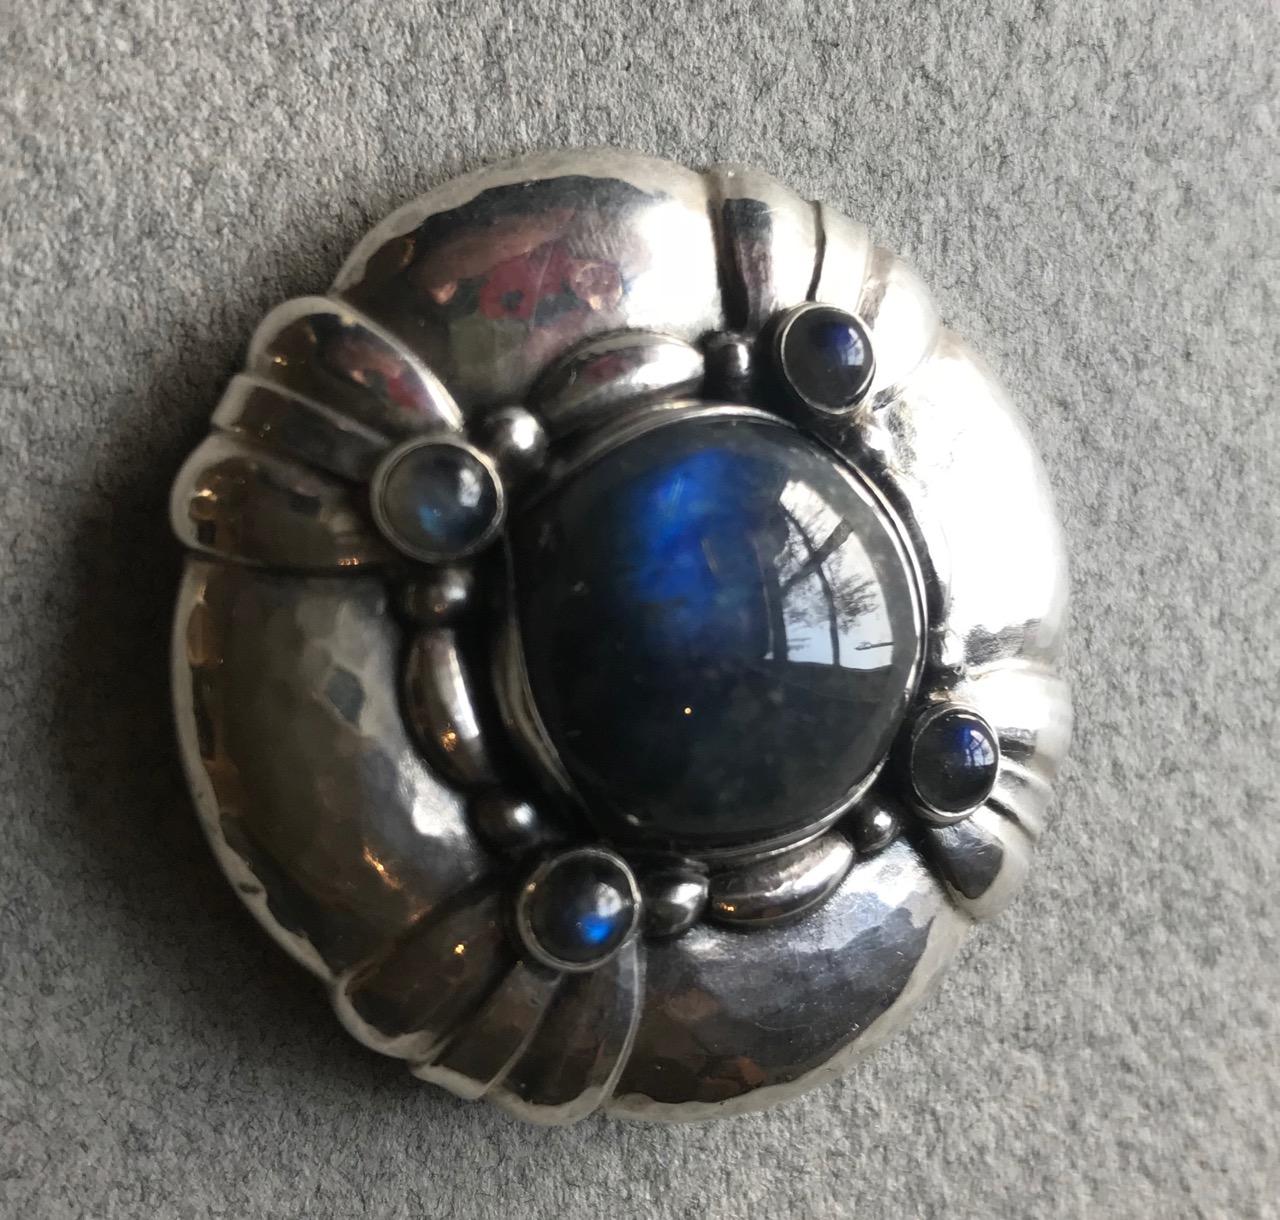 Stunning example of this rare design by Georg Jensen. Excellent patina and visible hand hammering. Labradorite cabochons of bright blue color.  Clasp has been soldered but still functioning and closes securely. 

A similar example can be seen in the